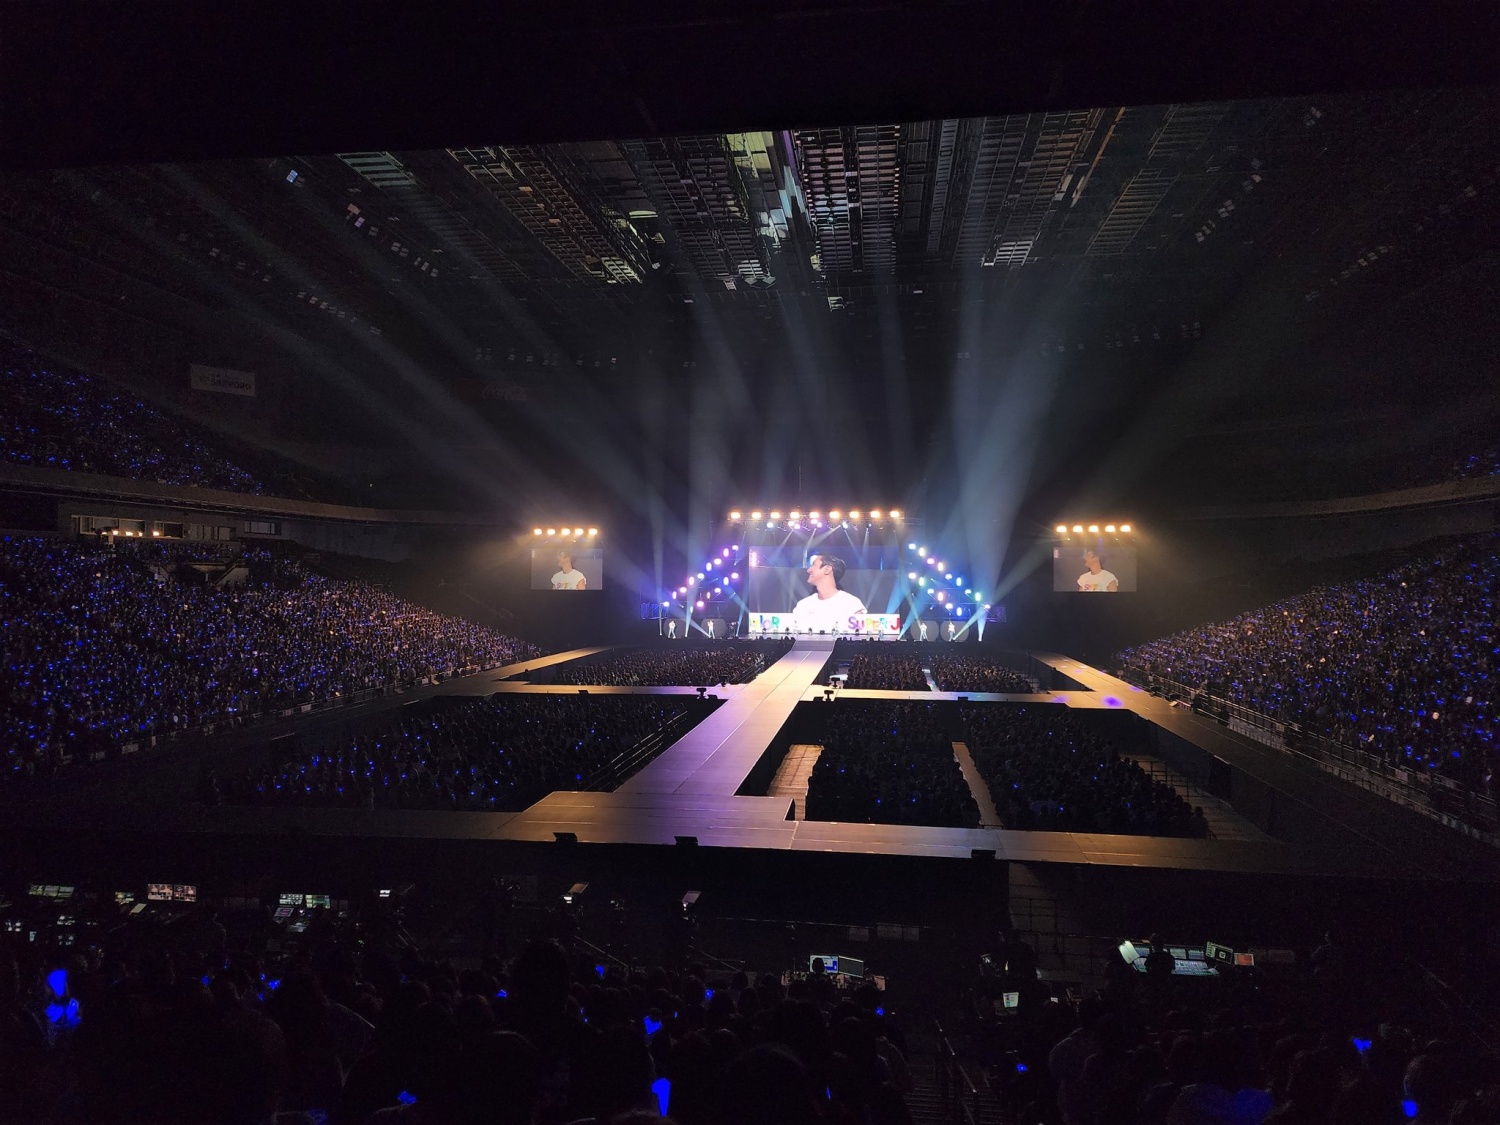 Super Junior's first Japanese performance in 2 years... 45,000 fan enthusiasm